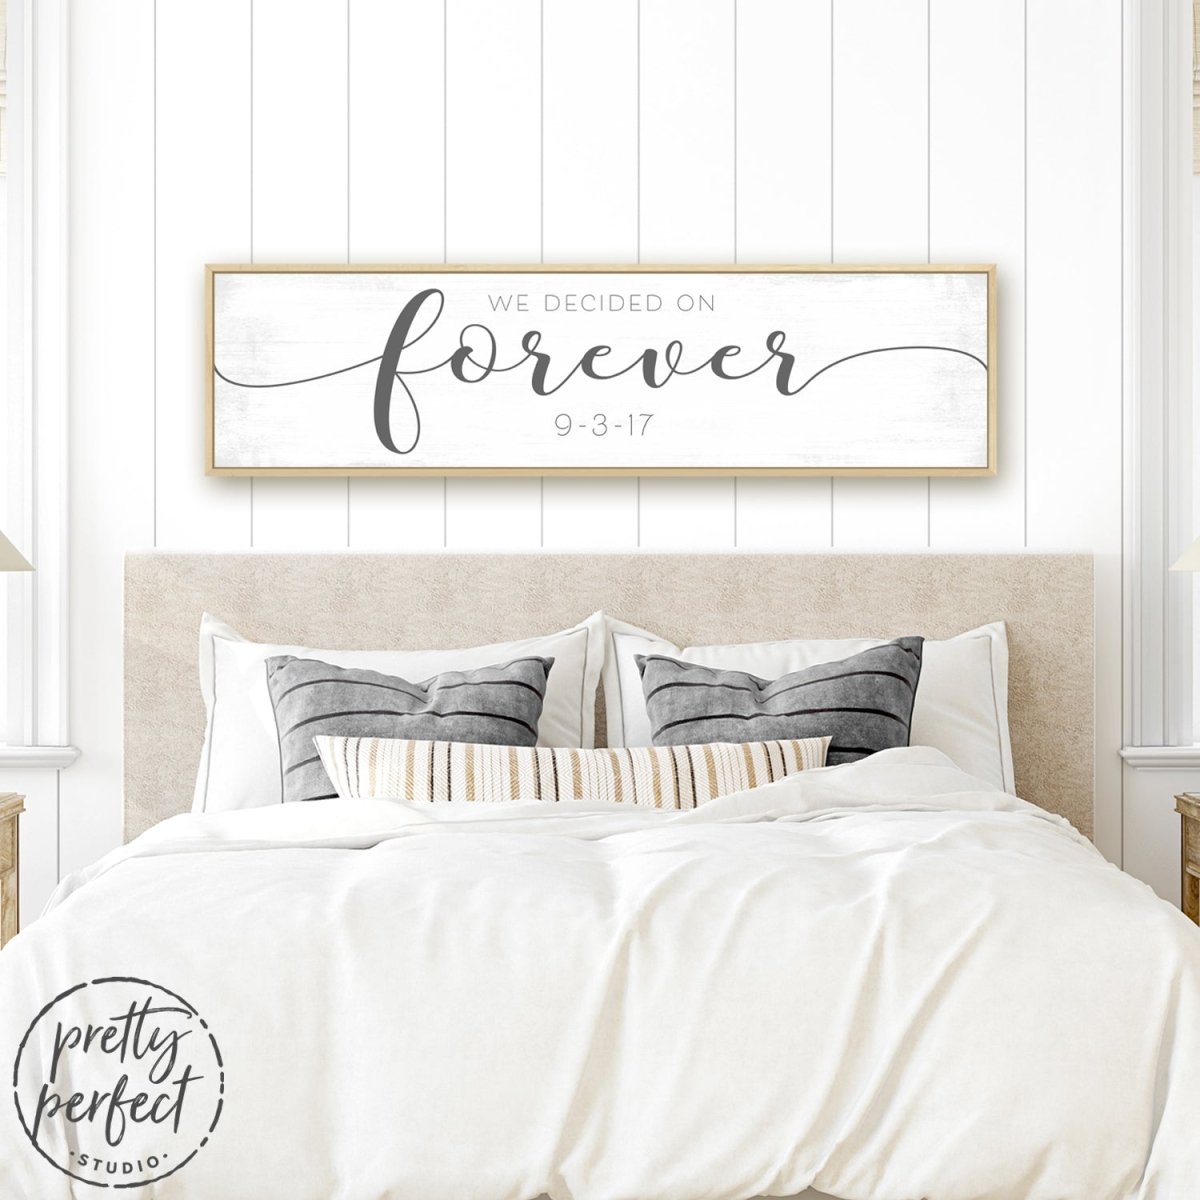 We Decided On Forever - Personalized Wedding Date Sign Over Headboard - Pretty Perfect Studio